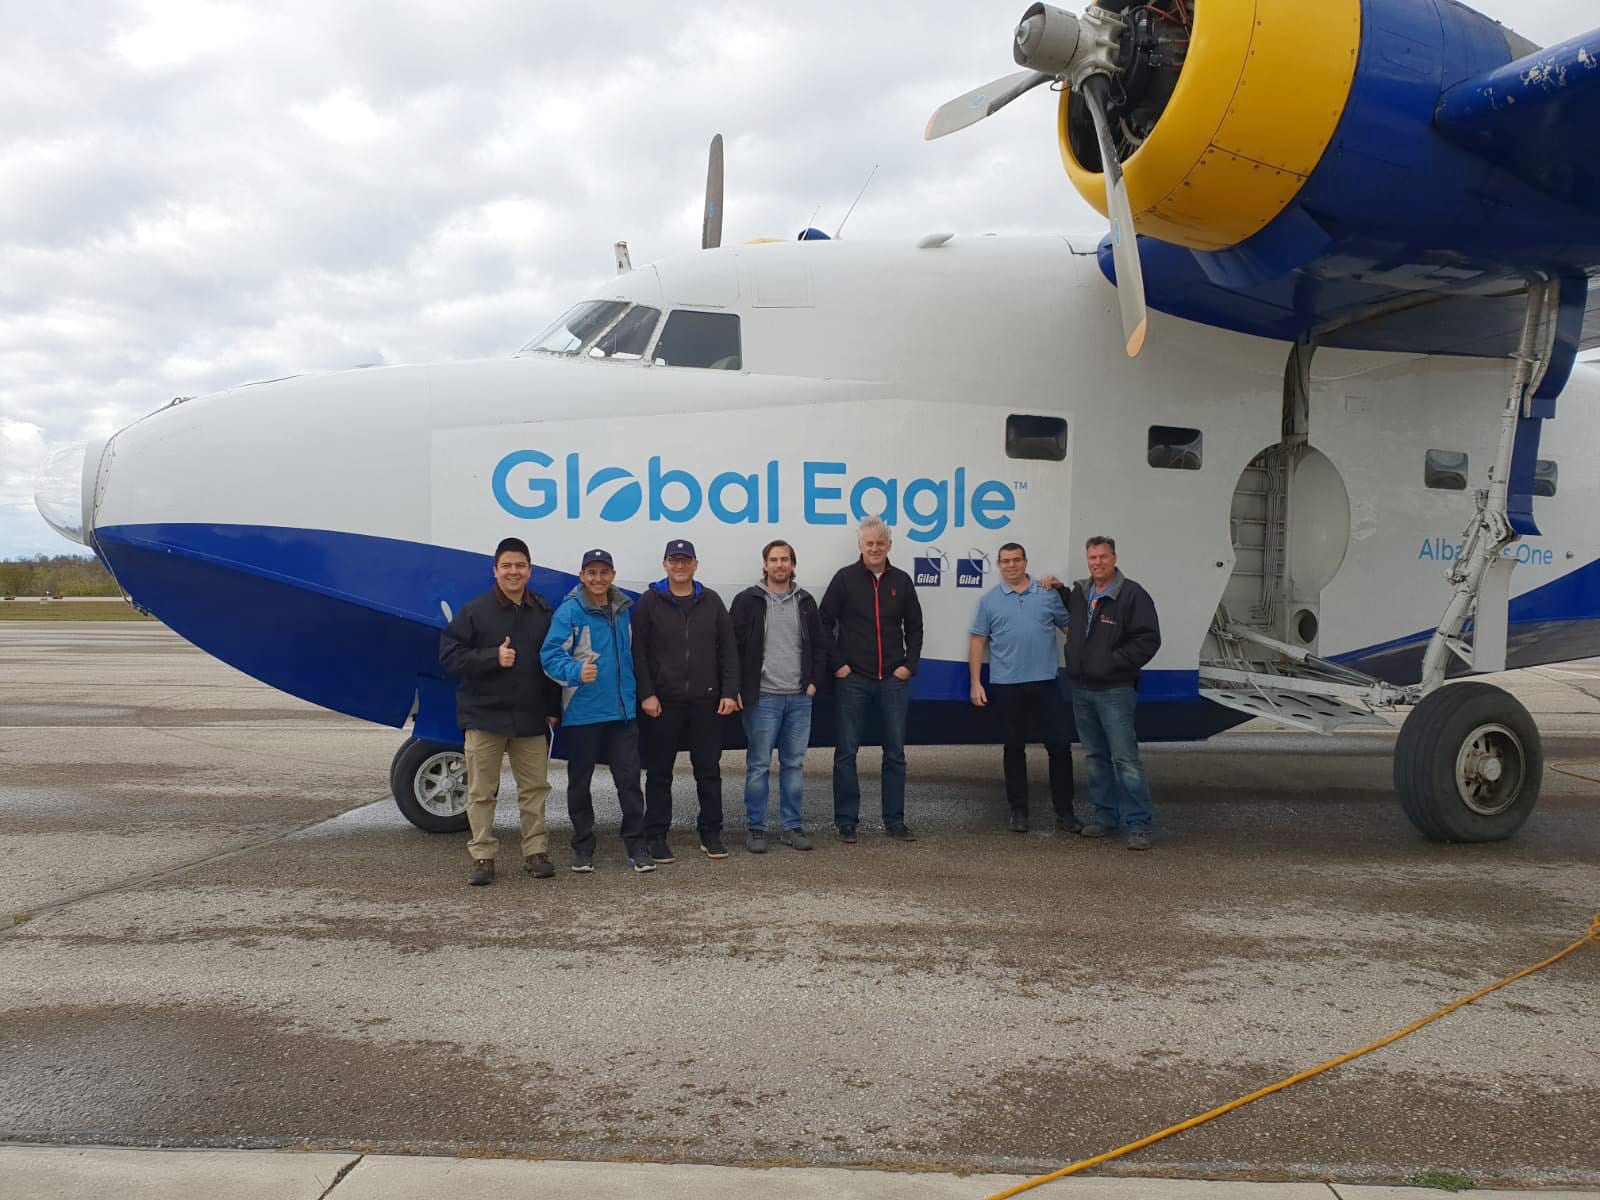 Global Eagle and Gilat Use Telesat’s Phase 1 LEO Satellite to Demonstrate First Ever,  Live In-flight Broadband Connectivity via LEO